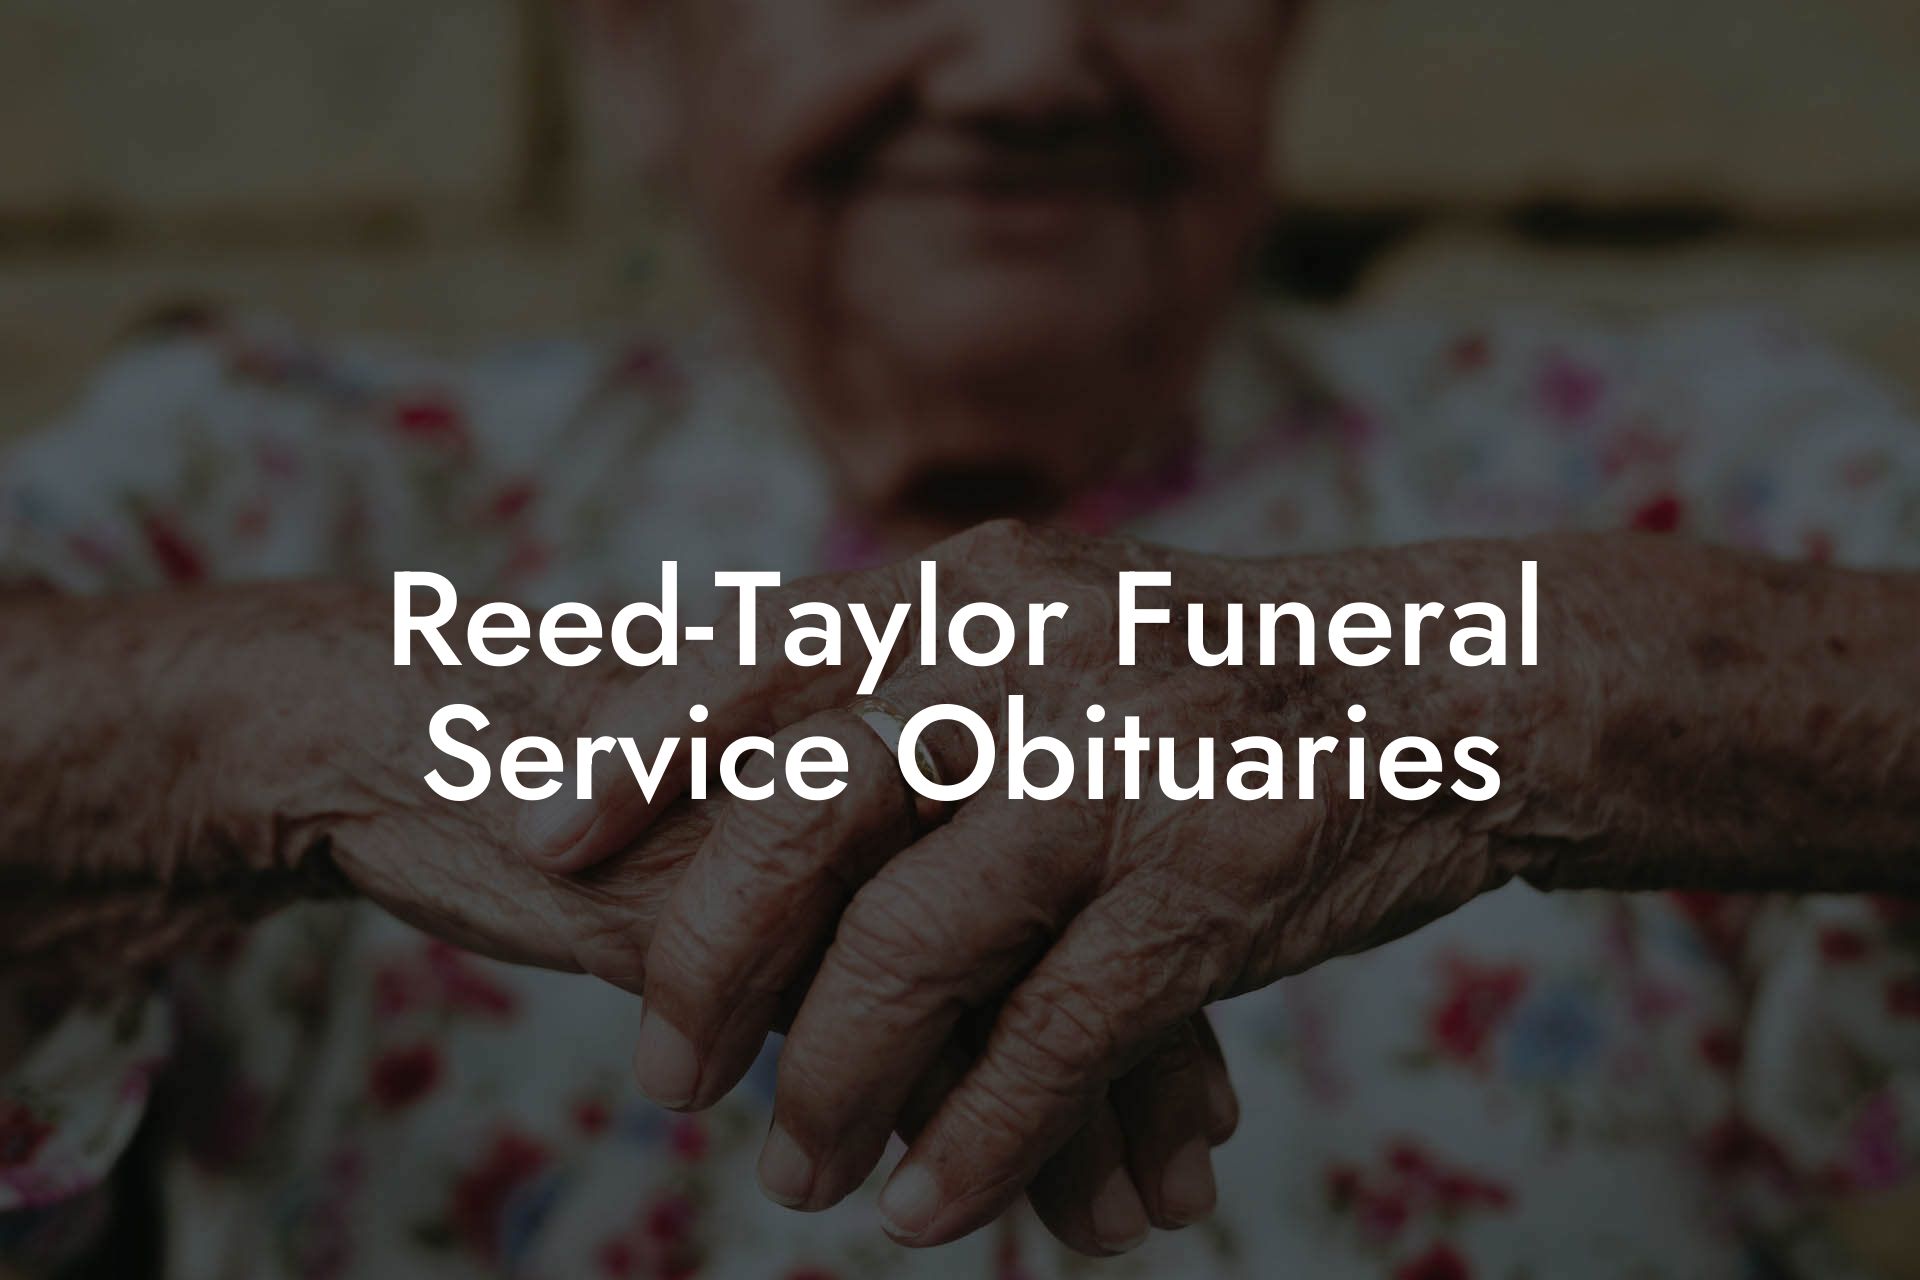 Reed-Taylor Funeral Service Obituaries